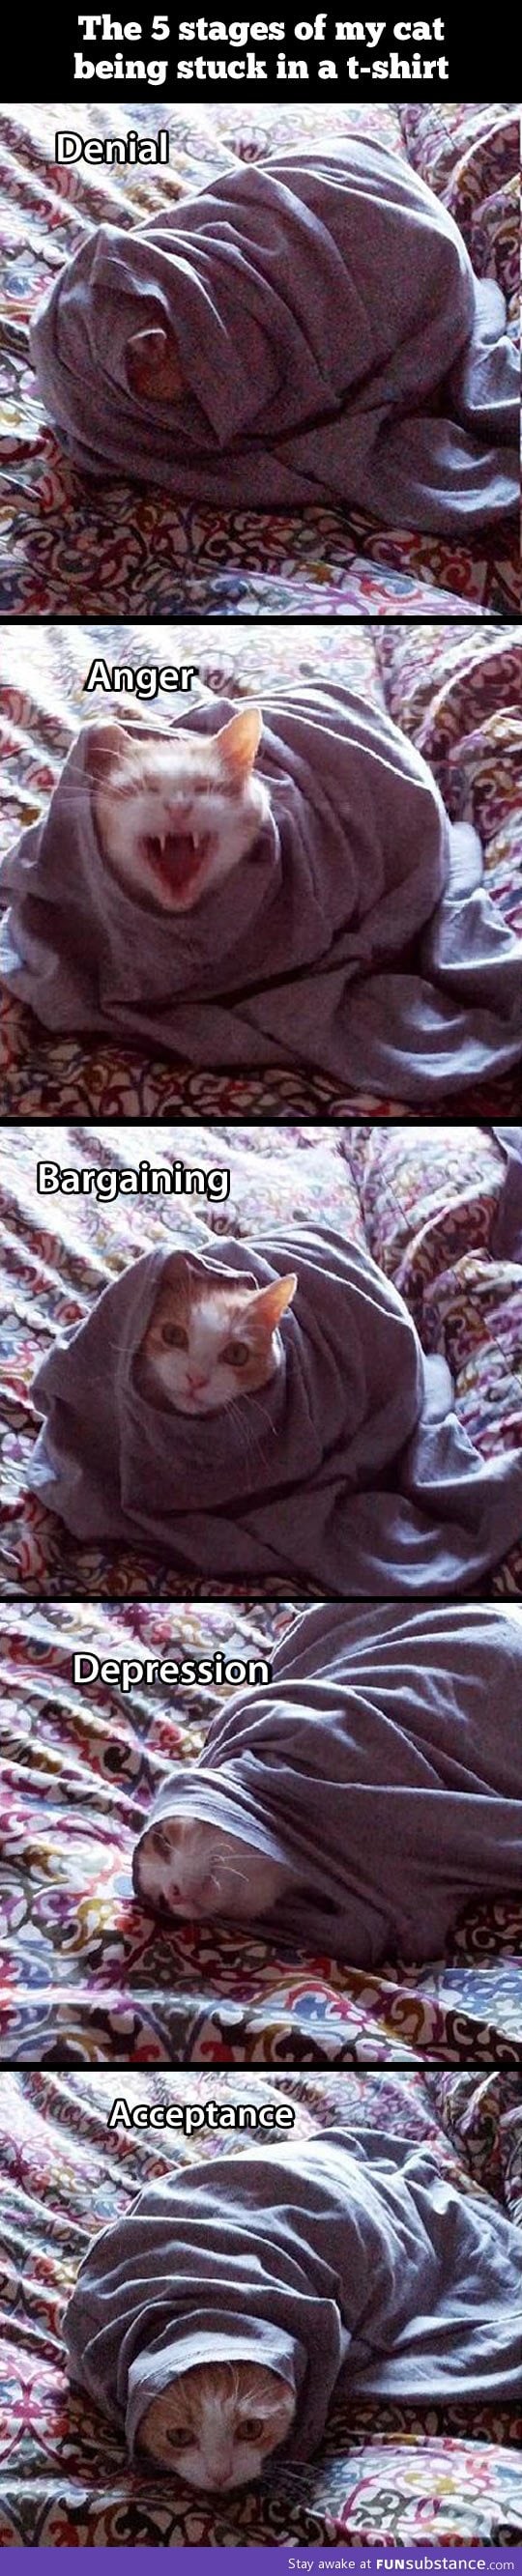 The 5 stages of a cat stuck in a t-Shirt